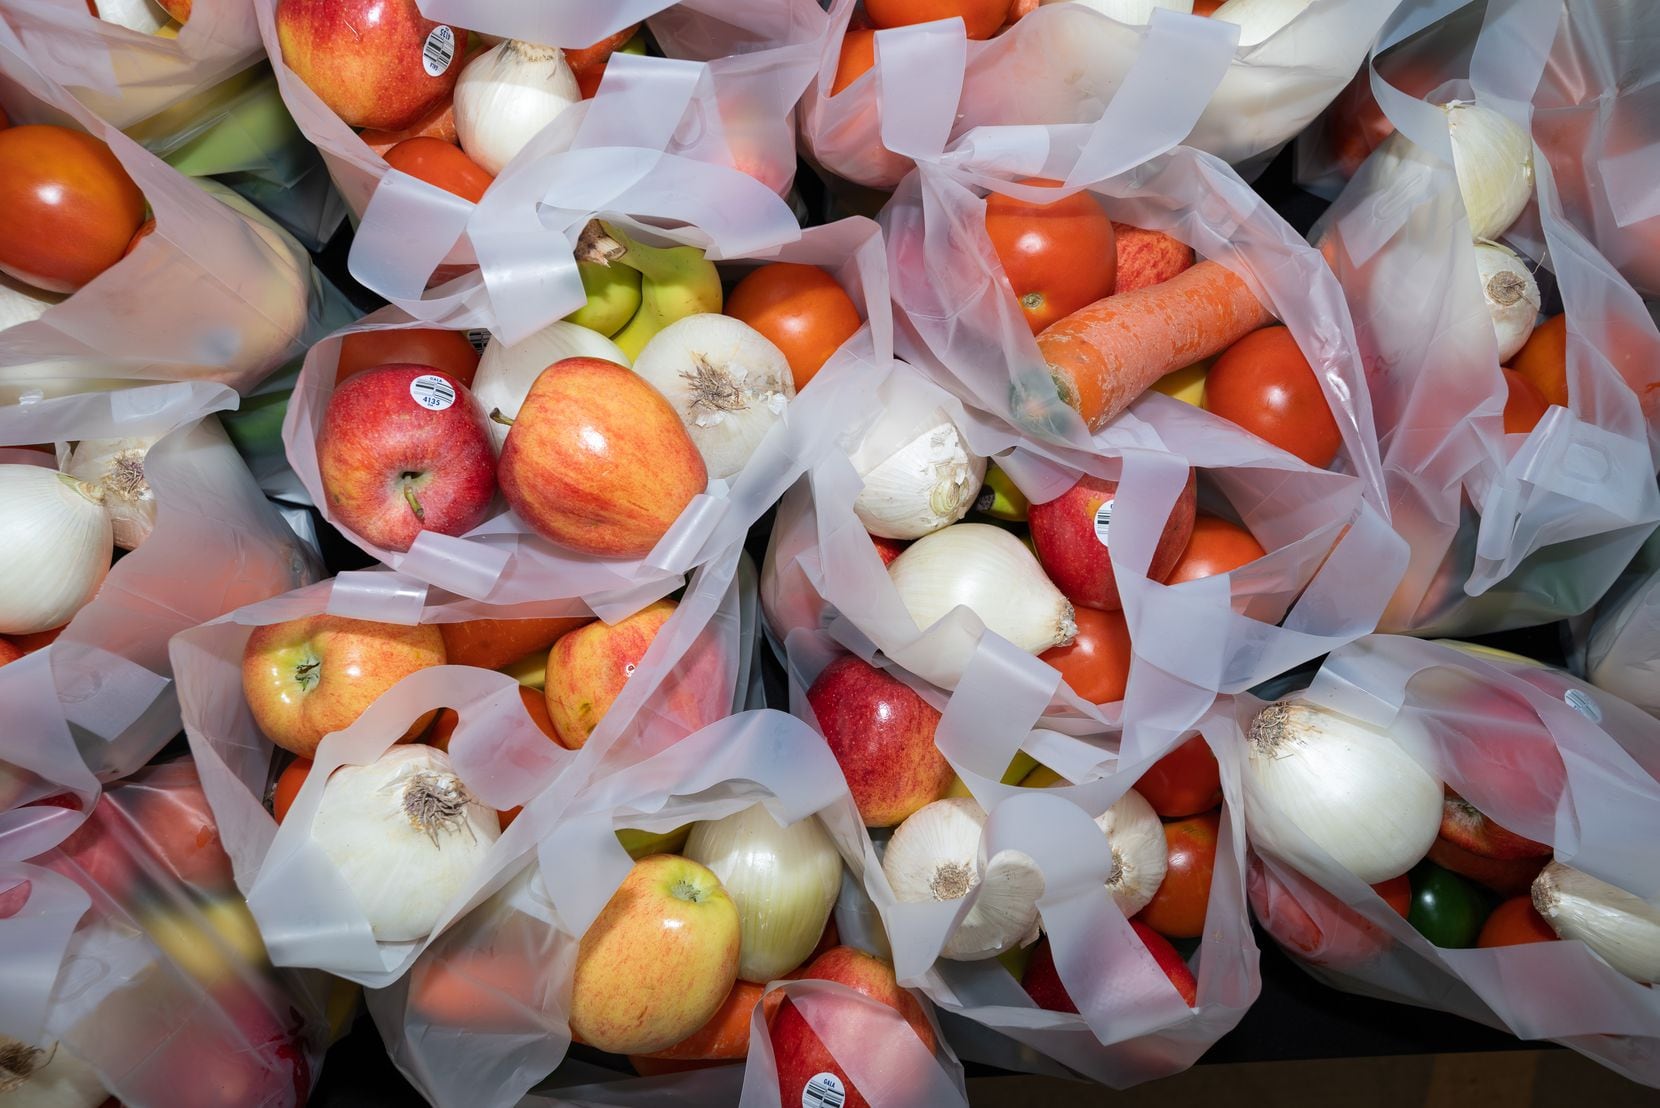 Bags of fruit and vegetables were handed to families during a drive-up event offering a...